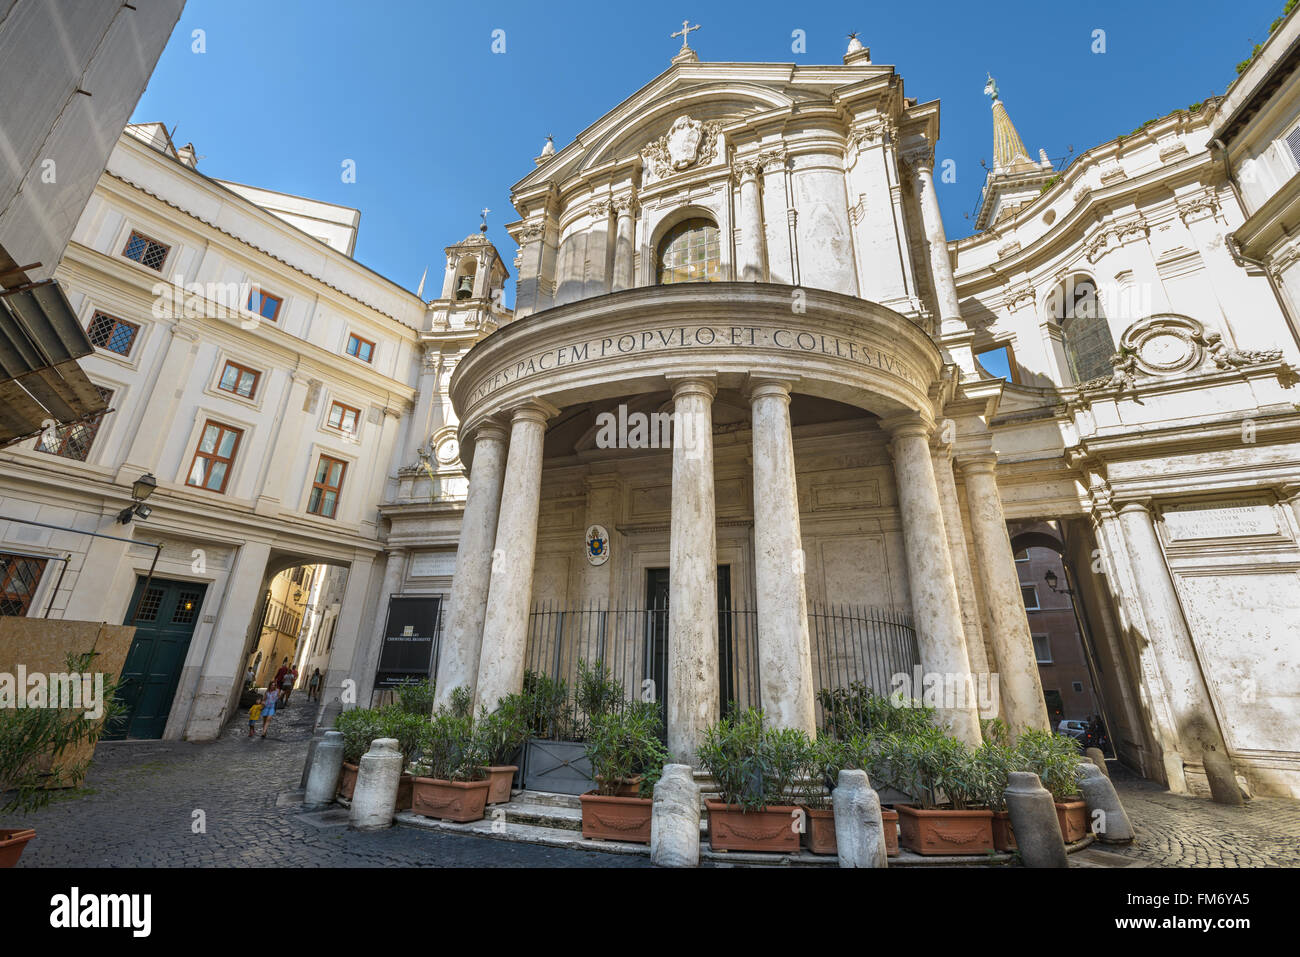 Rome, Italy - August 22, 2015: nice little square in Rome with church  people walking in background Stock Photo